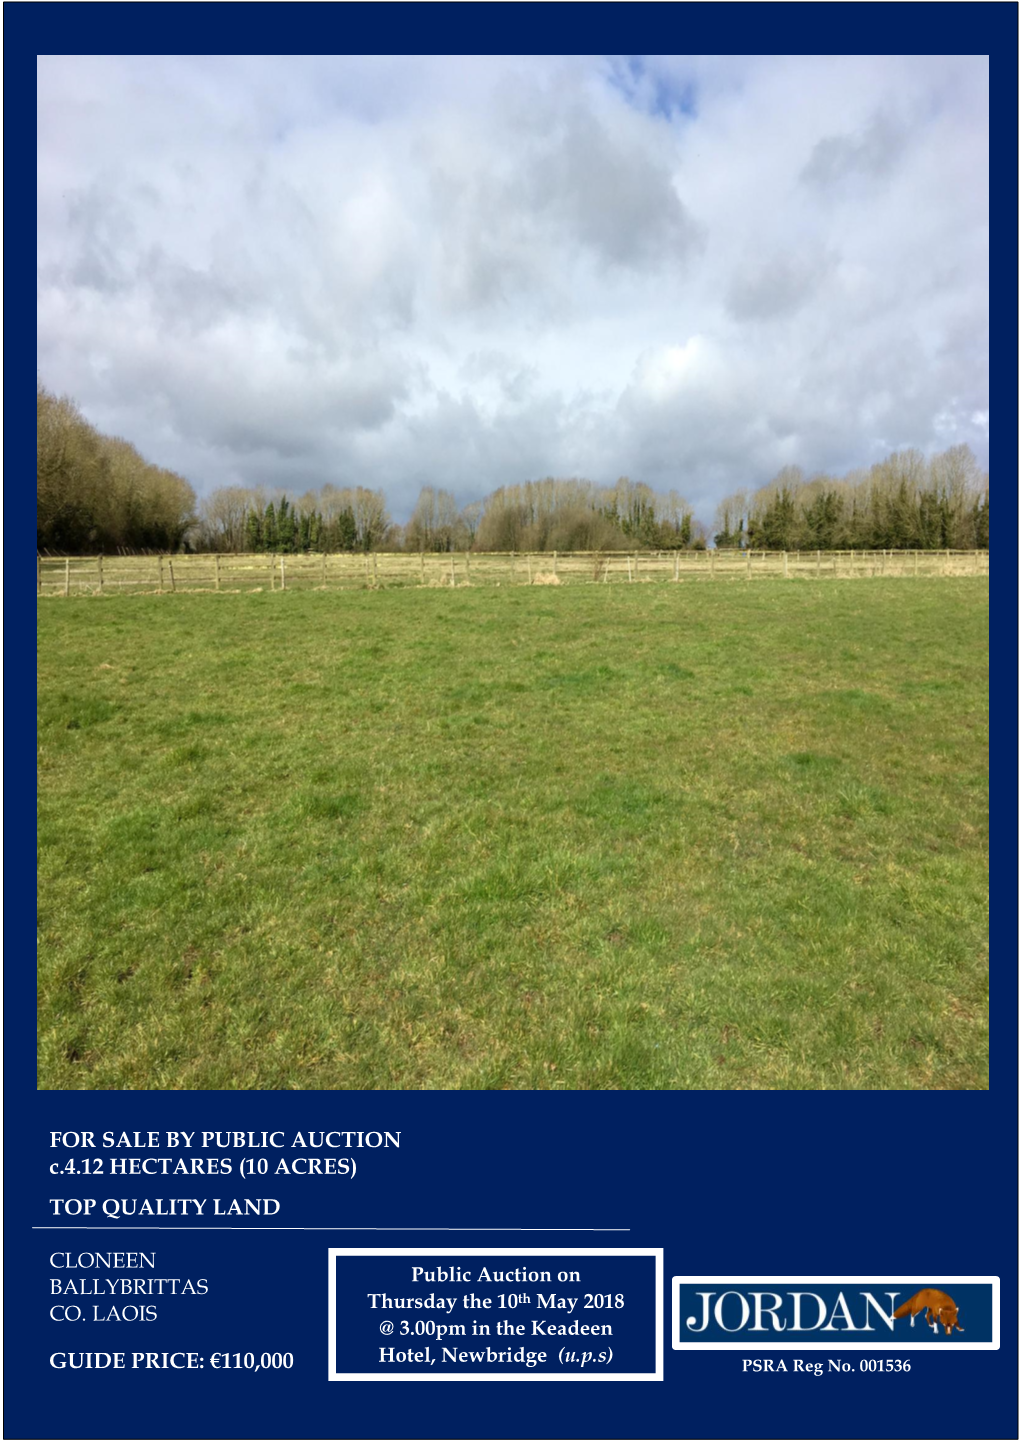 FOR SALE by PUBLIC AUCTION C.4.12 HECTARES (10 ACRES)